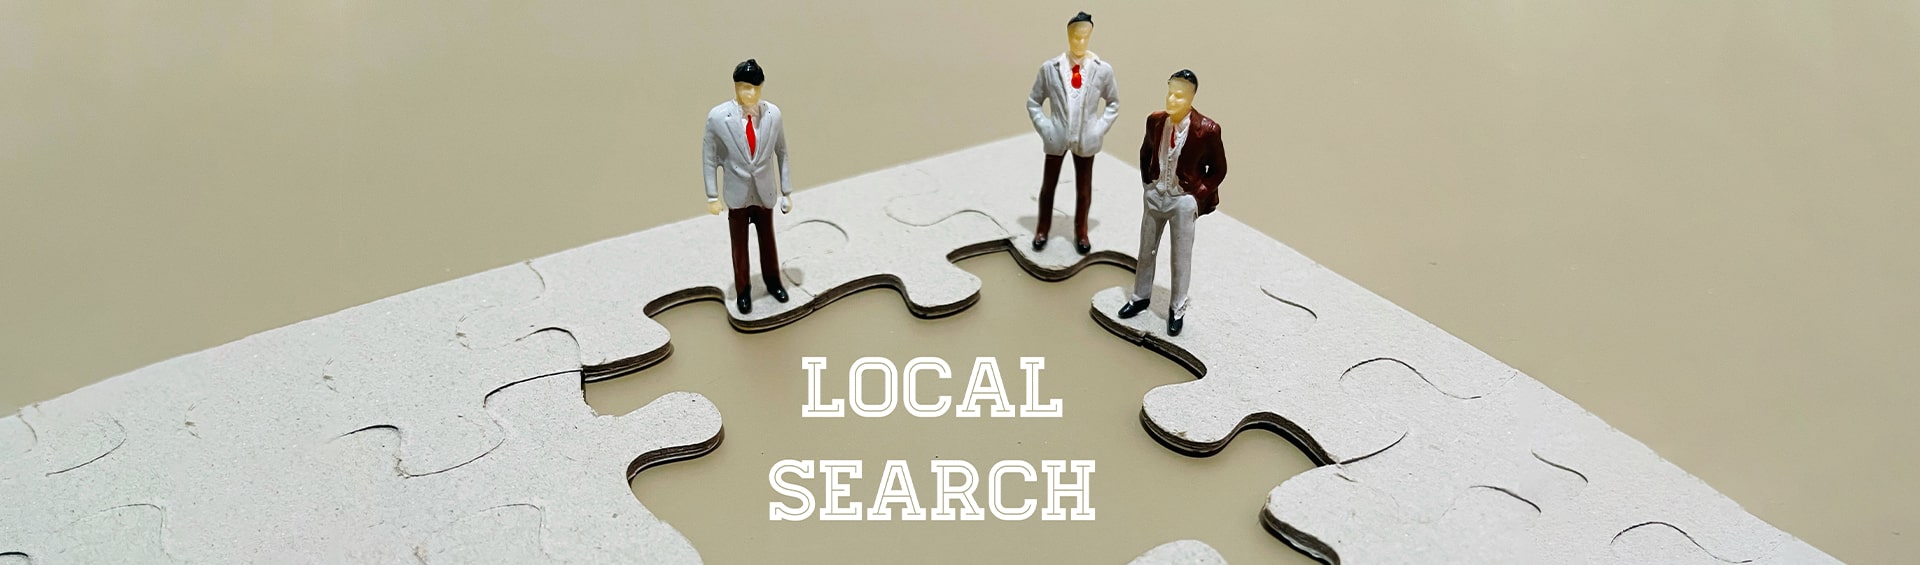 How to Improve the Local SEO of your Website